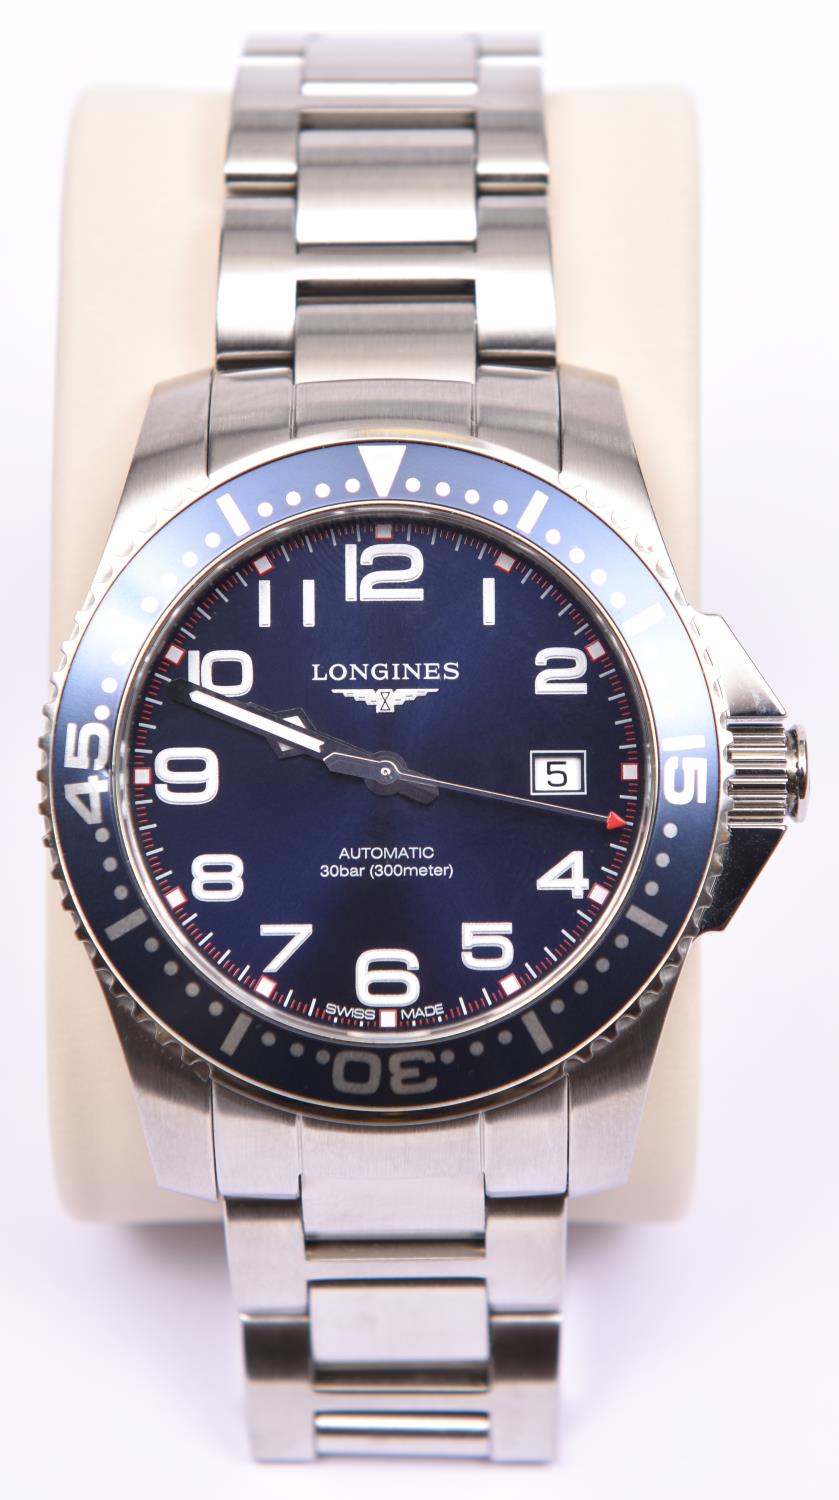 A Longines Hydro Conquest Automatic watch with automatic self winding mechanism. Stainless steel